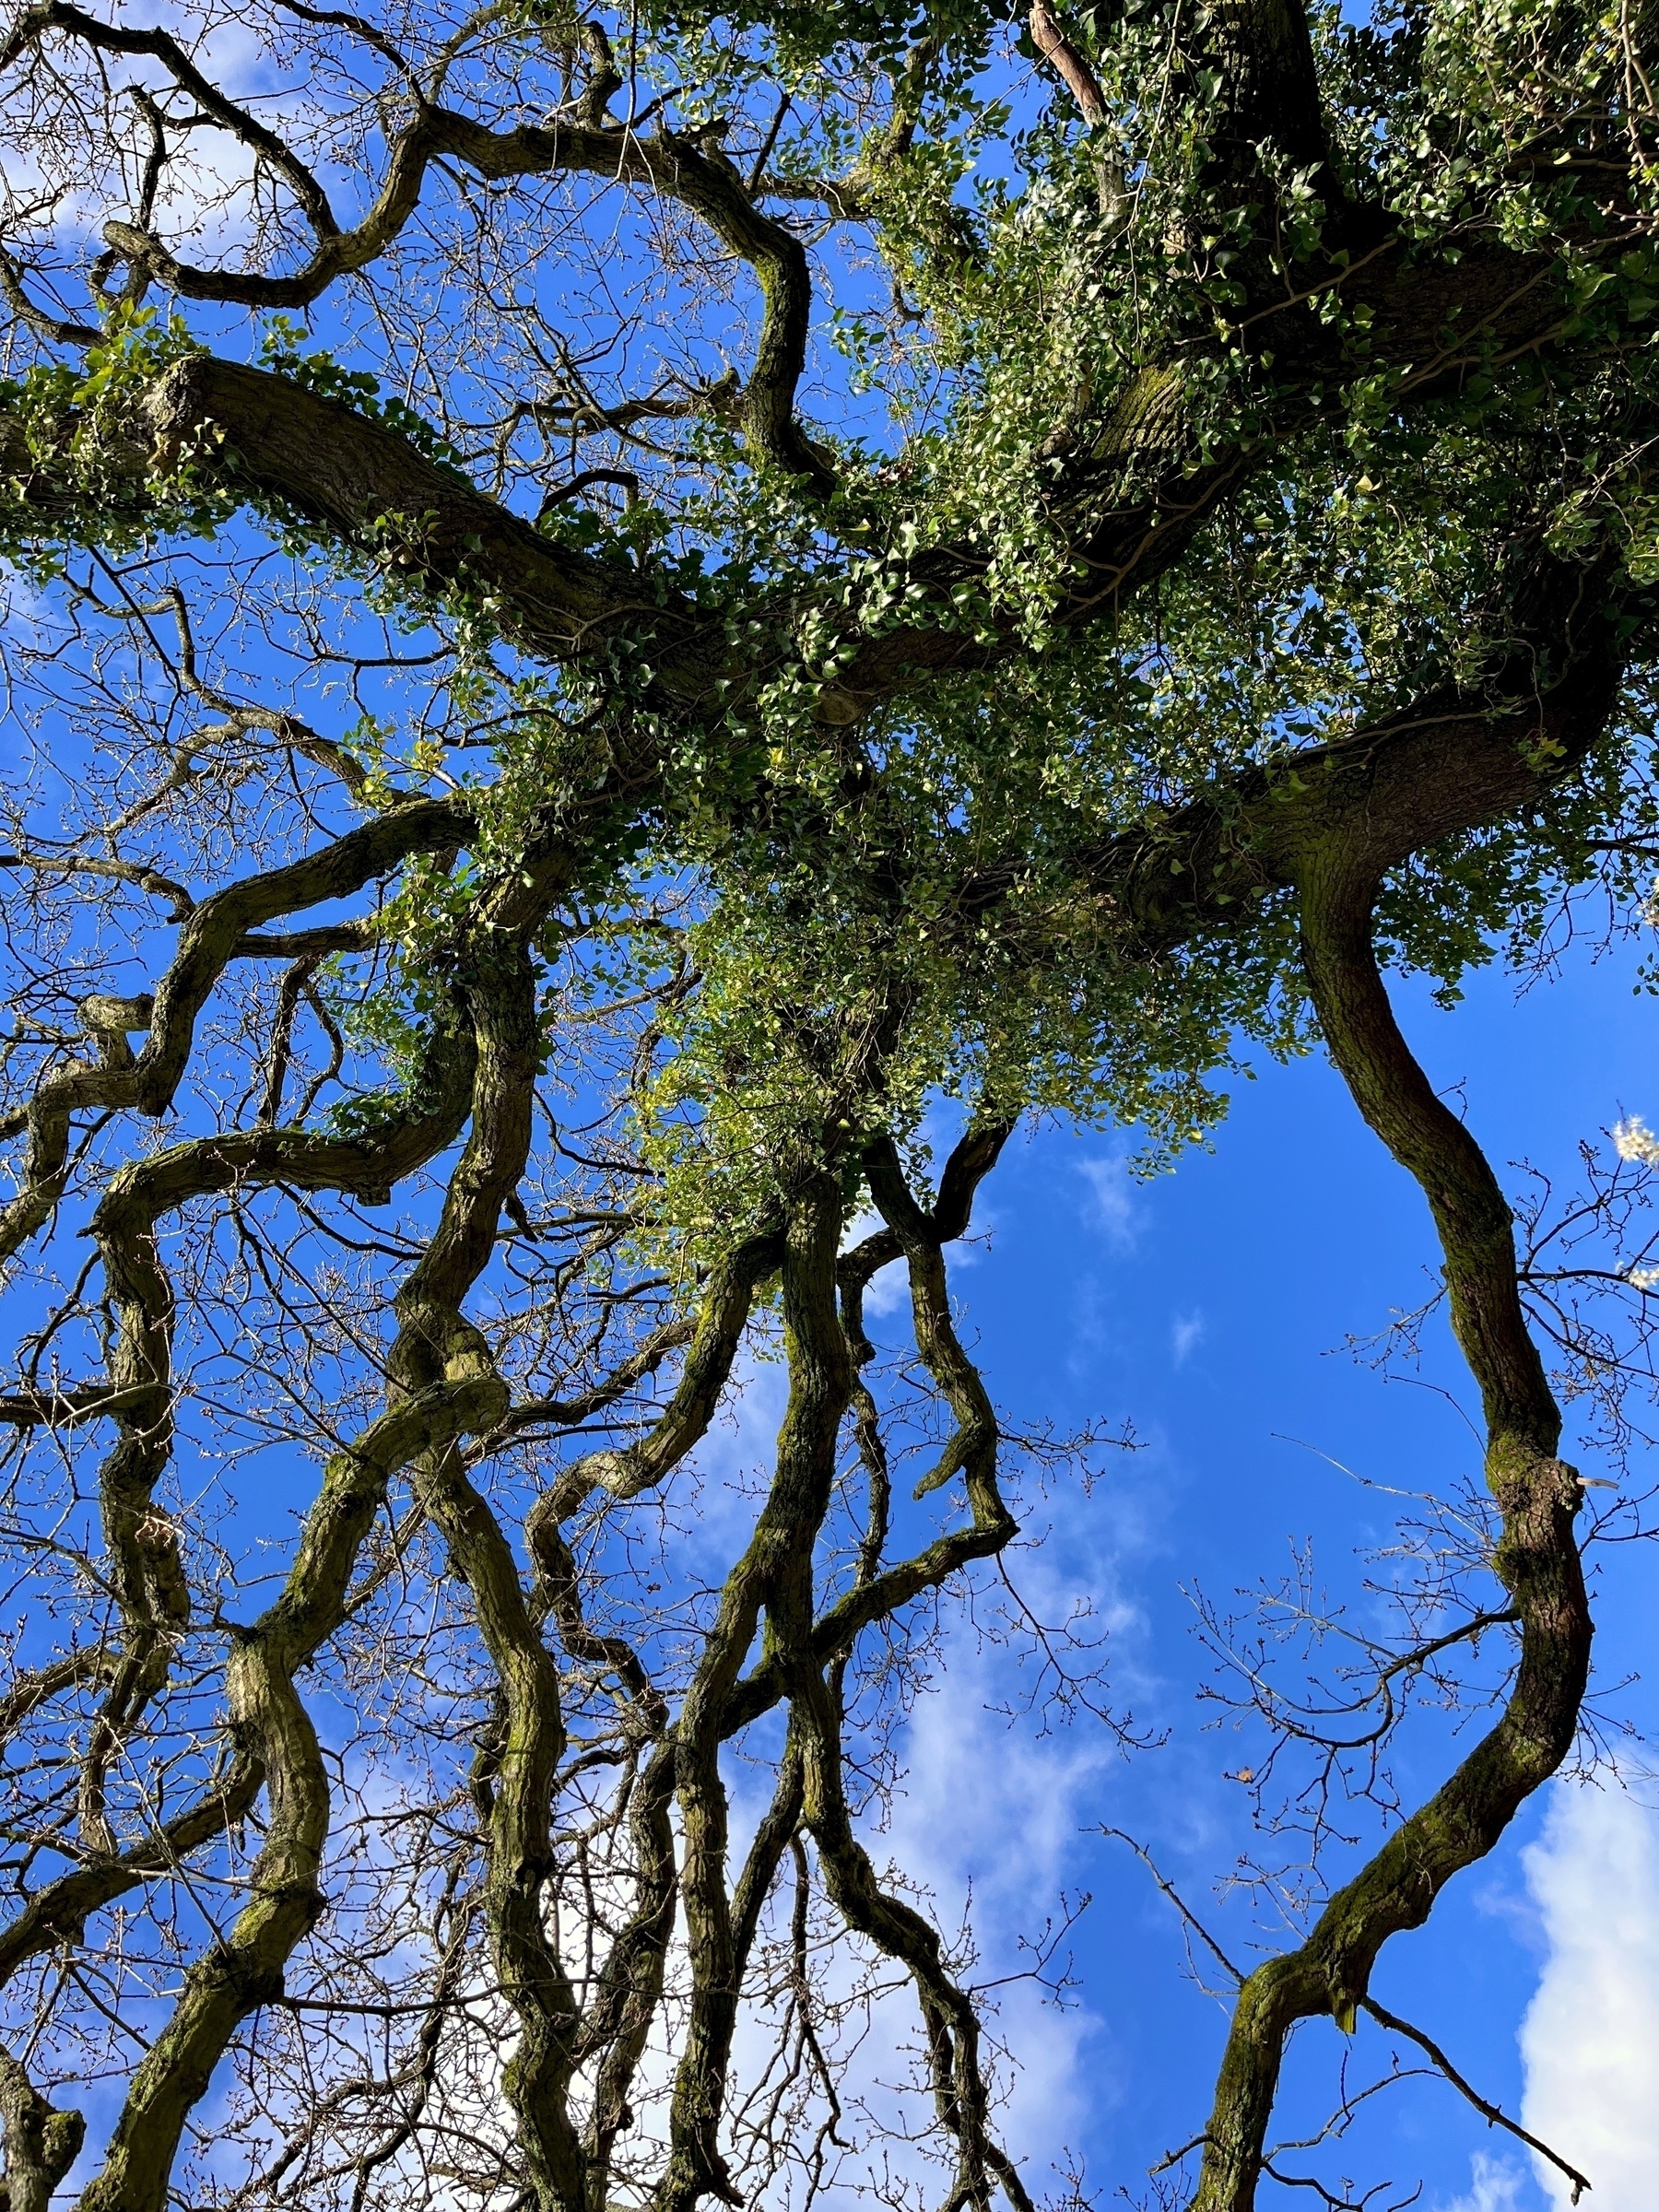 Looking up into the crooked branches of an oak. The oak is still in bud, but the ivy climbing it has fresh green leaves. The sun lights up patches on the bark, illuminating moss.